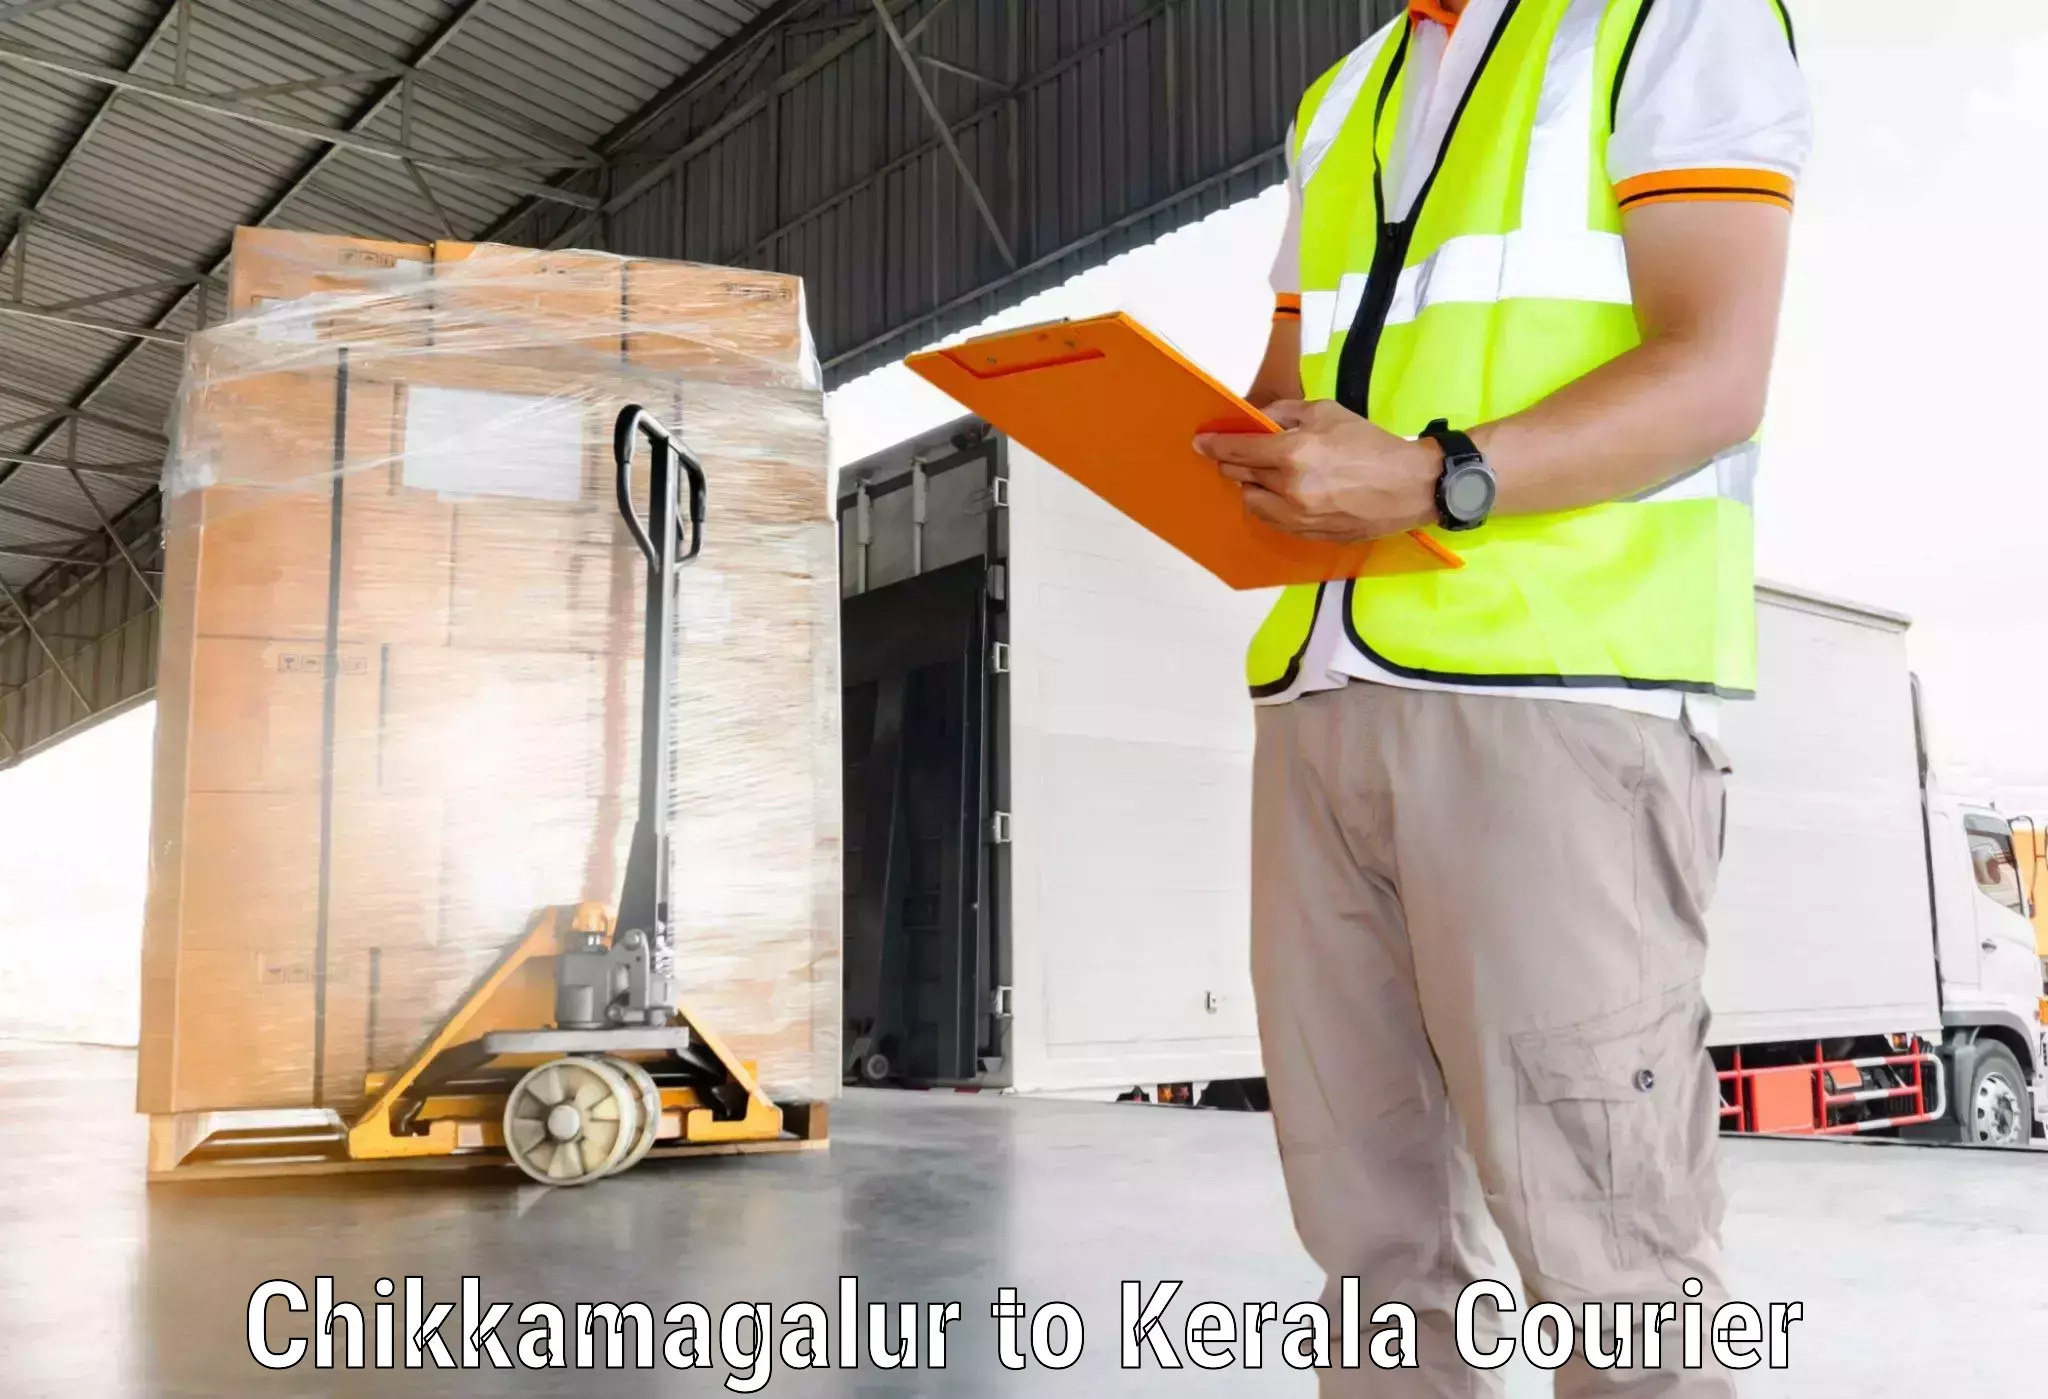 Efficient shipping operations in Chikkamagalur to Trivandrum